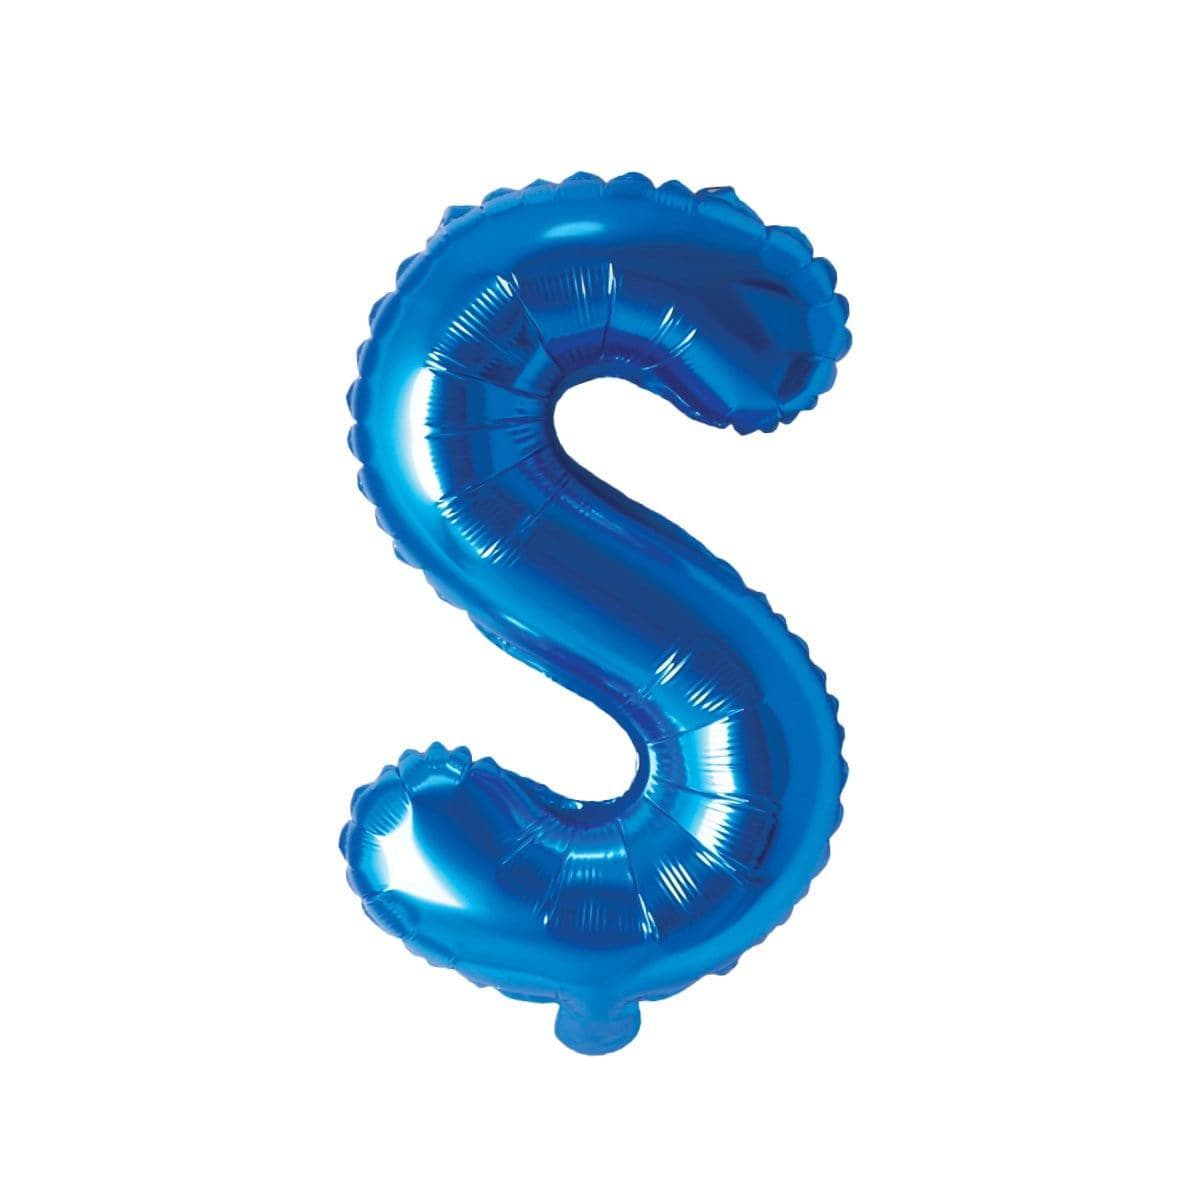 Buy Balloons Blue Letter S Foil Balloon, 16 Inches sold at Party Expert